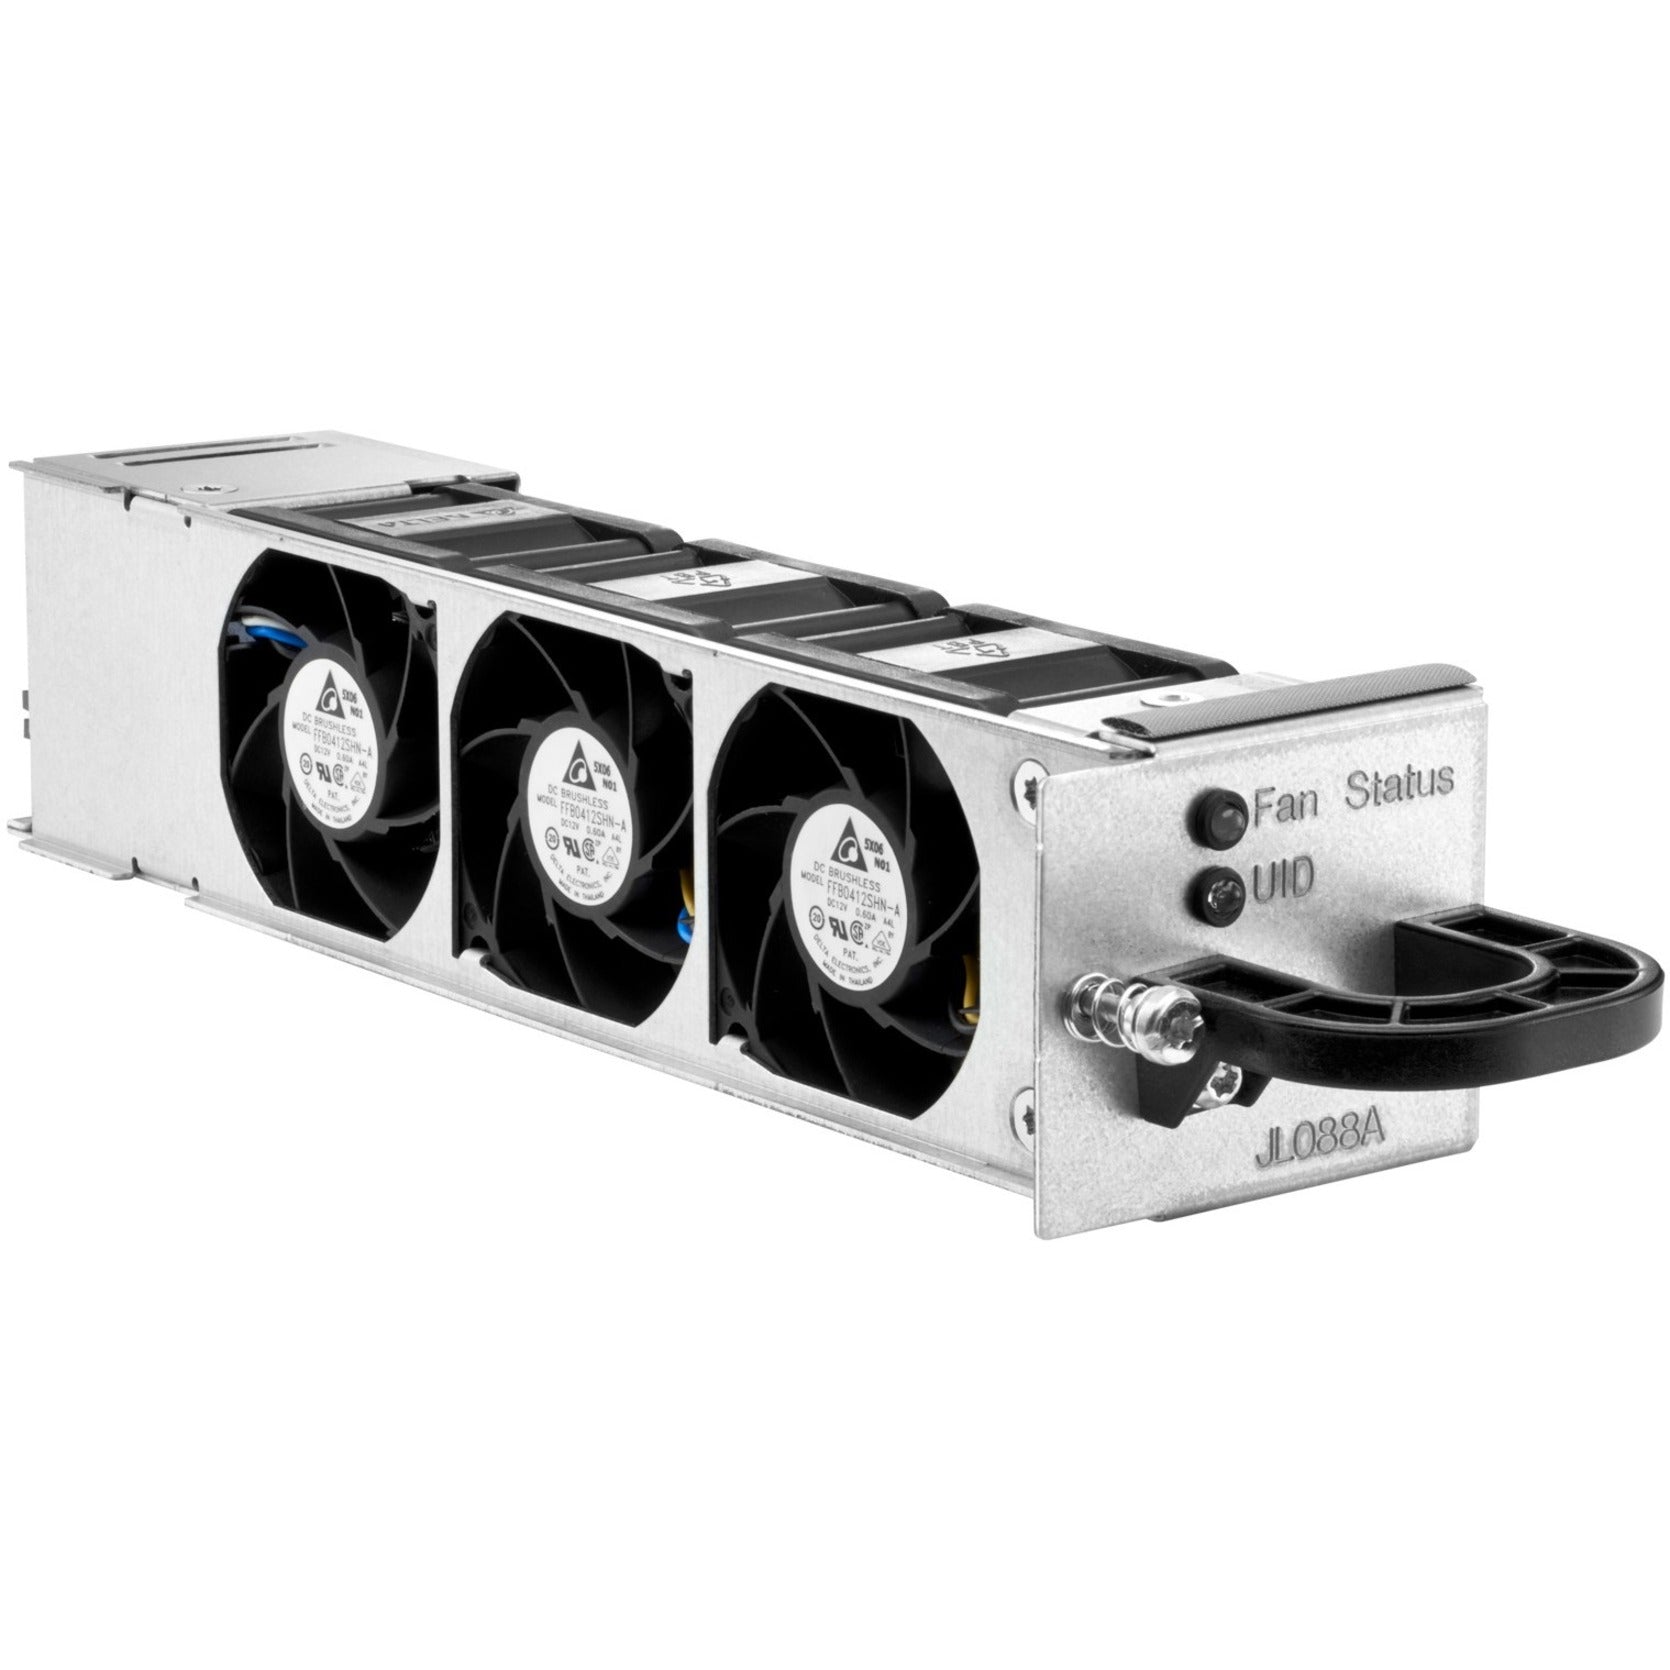 HPE JL088A Aruba 3810 Switch Fan Tray, Efficient Cooling for Your Network